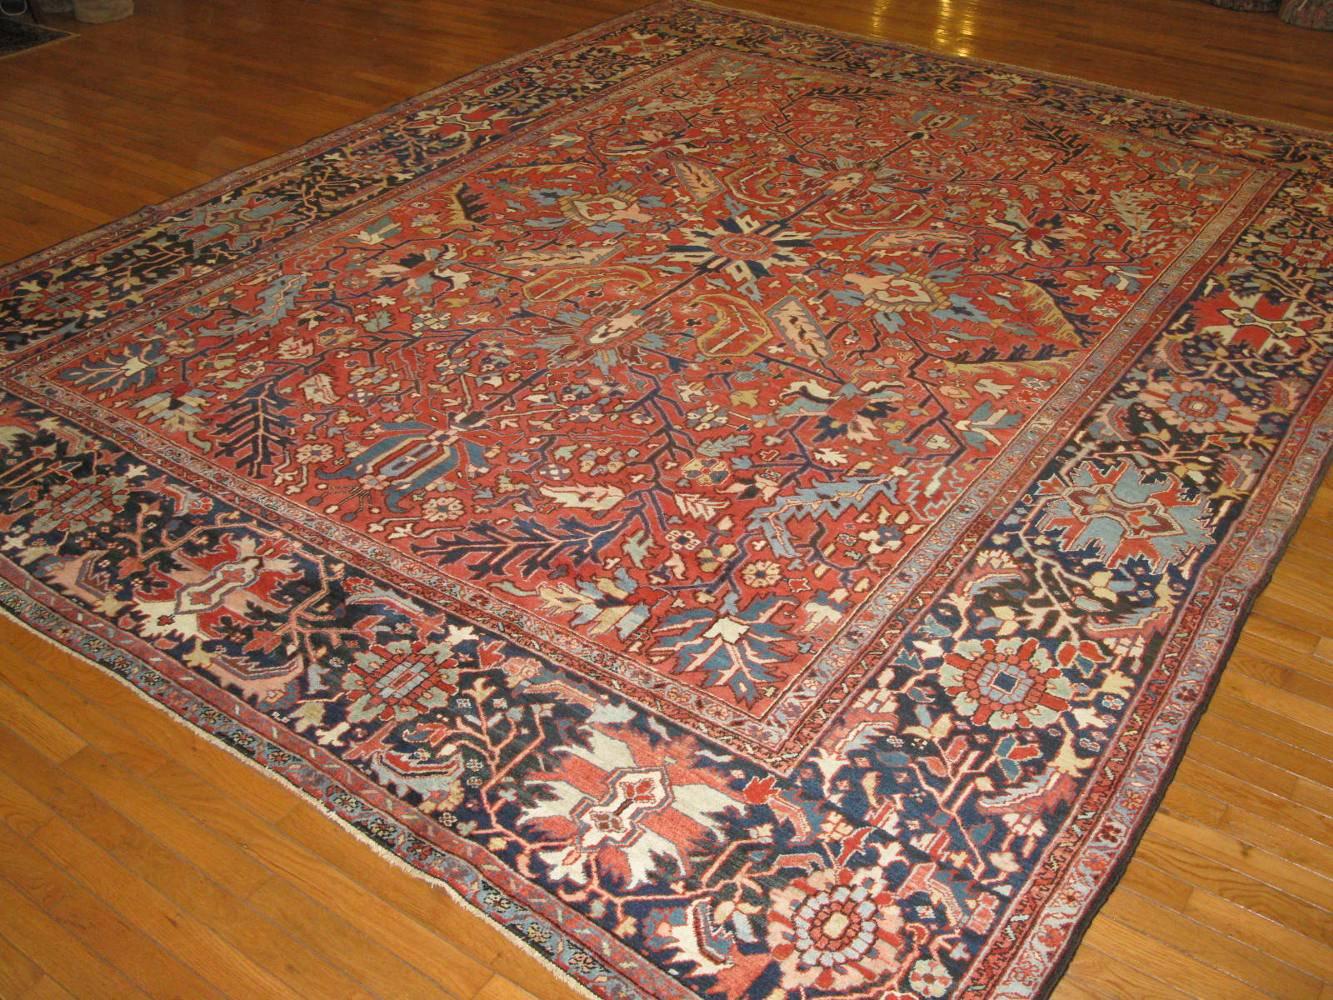 This is a beautiful antique hand-knotted Persian Heriz/Serapi rug. It has an easy all-over pattern design to work with. It has a Fine and uniform weave. The rug is in excellent condition and measures: 10' x 12' 4''.